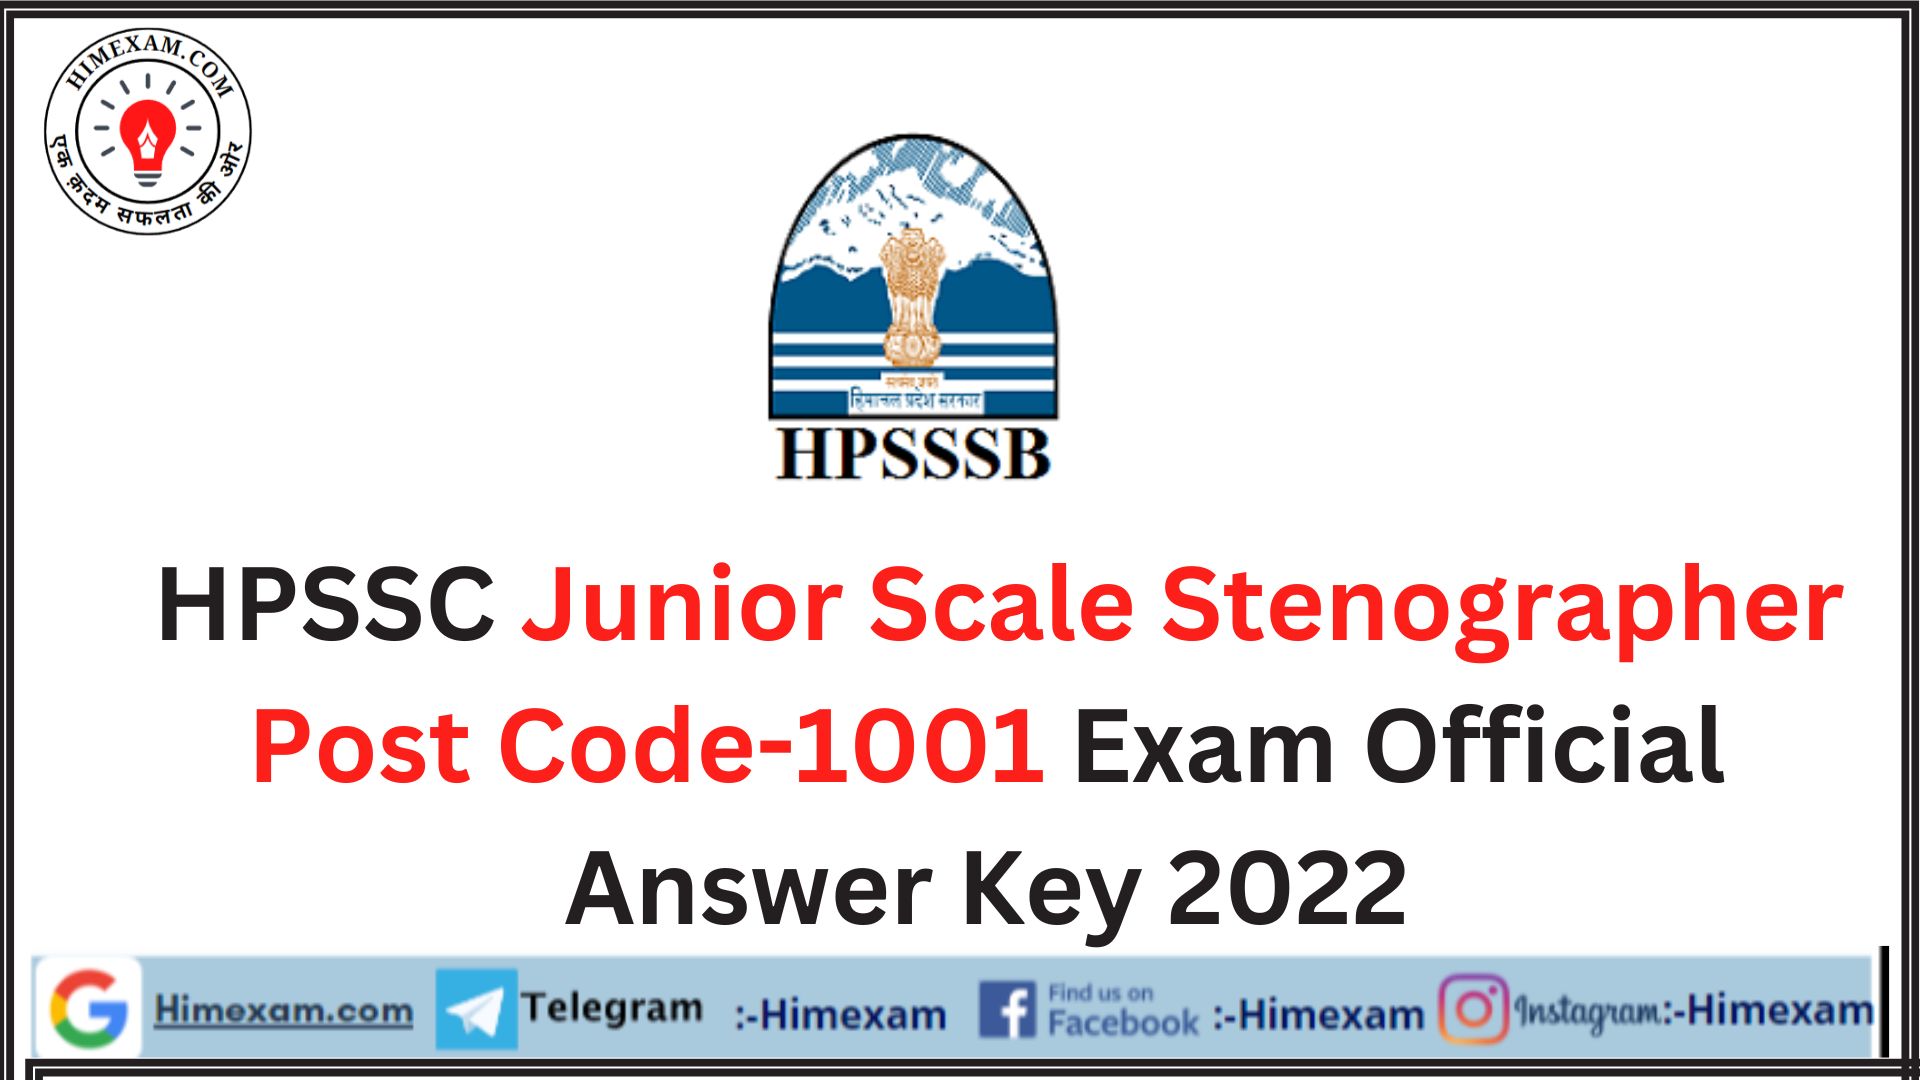 HPSSC Junior Scale Stenographer Post Code-1001 Exam Official Answer Key 2022